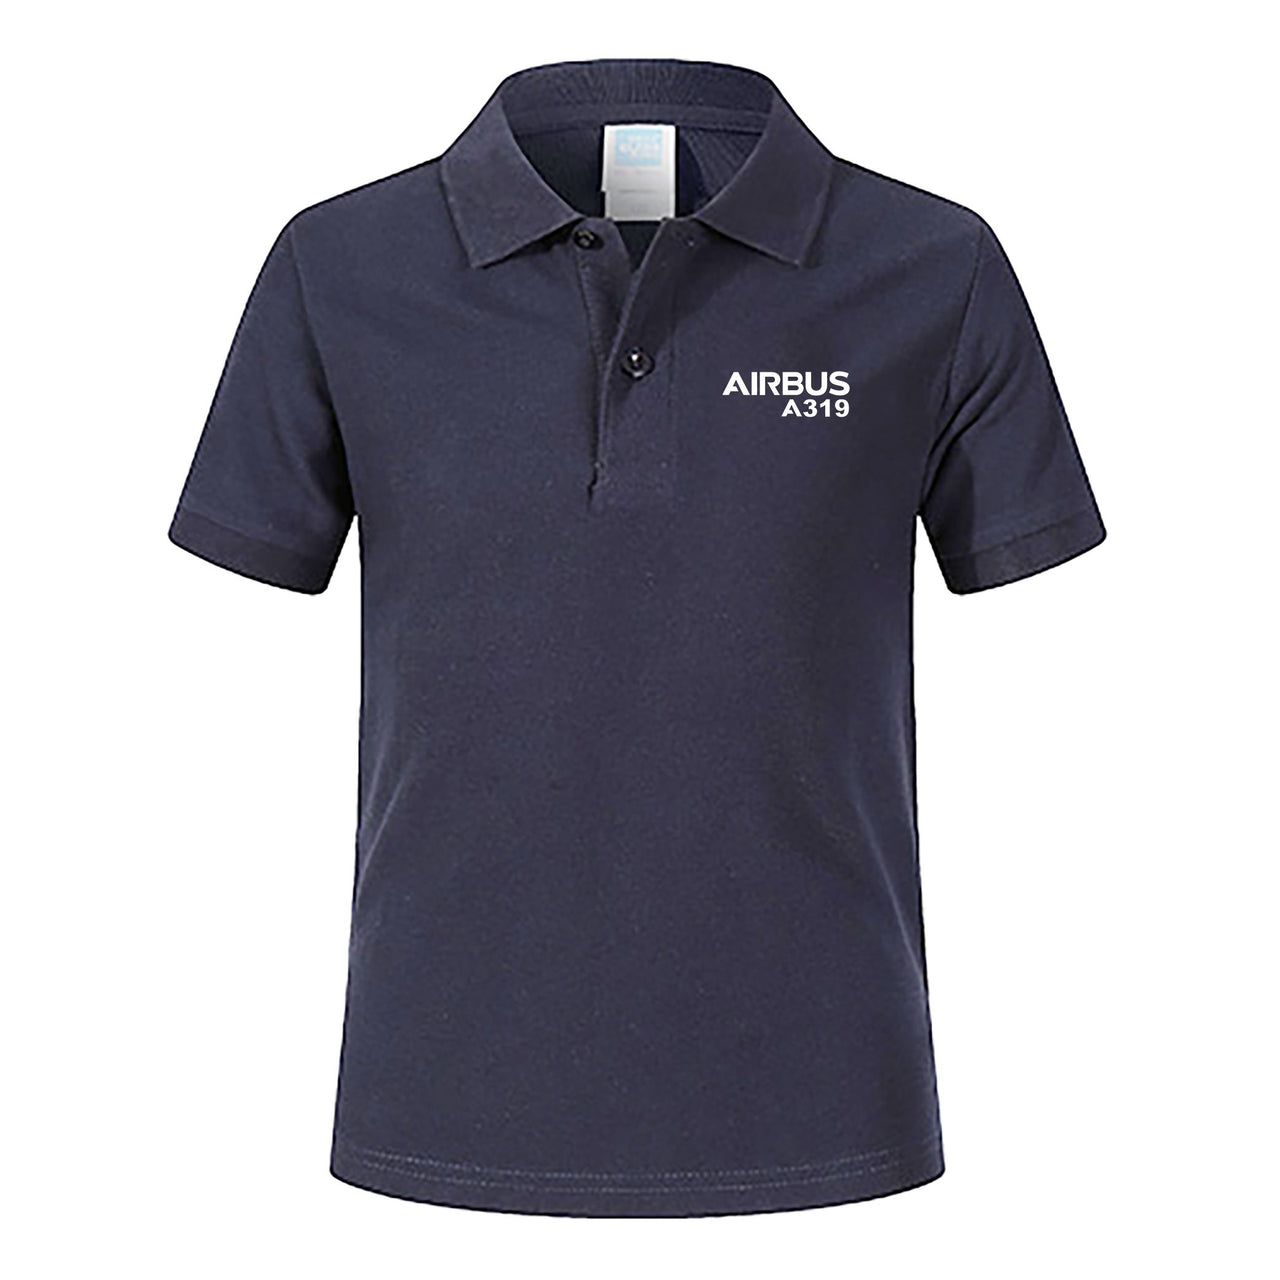 Airbus A319 & Text Designed Children Polo T-Shirts